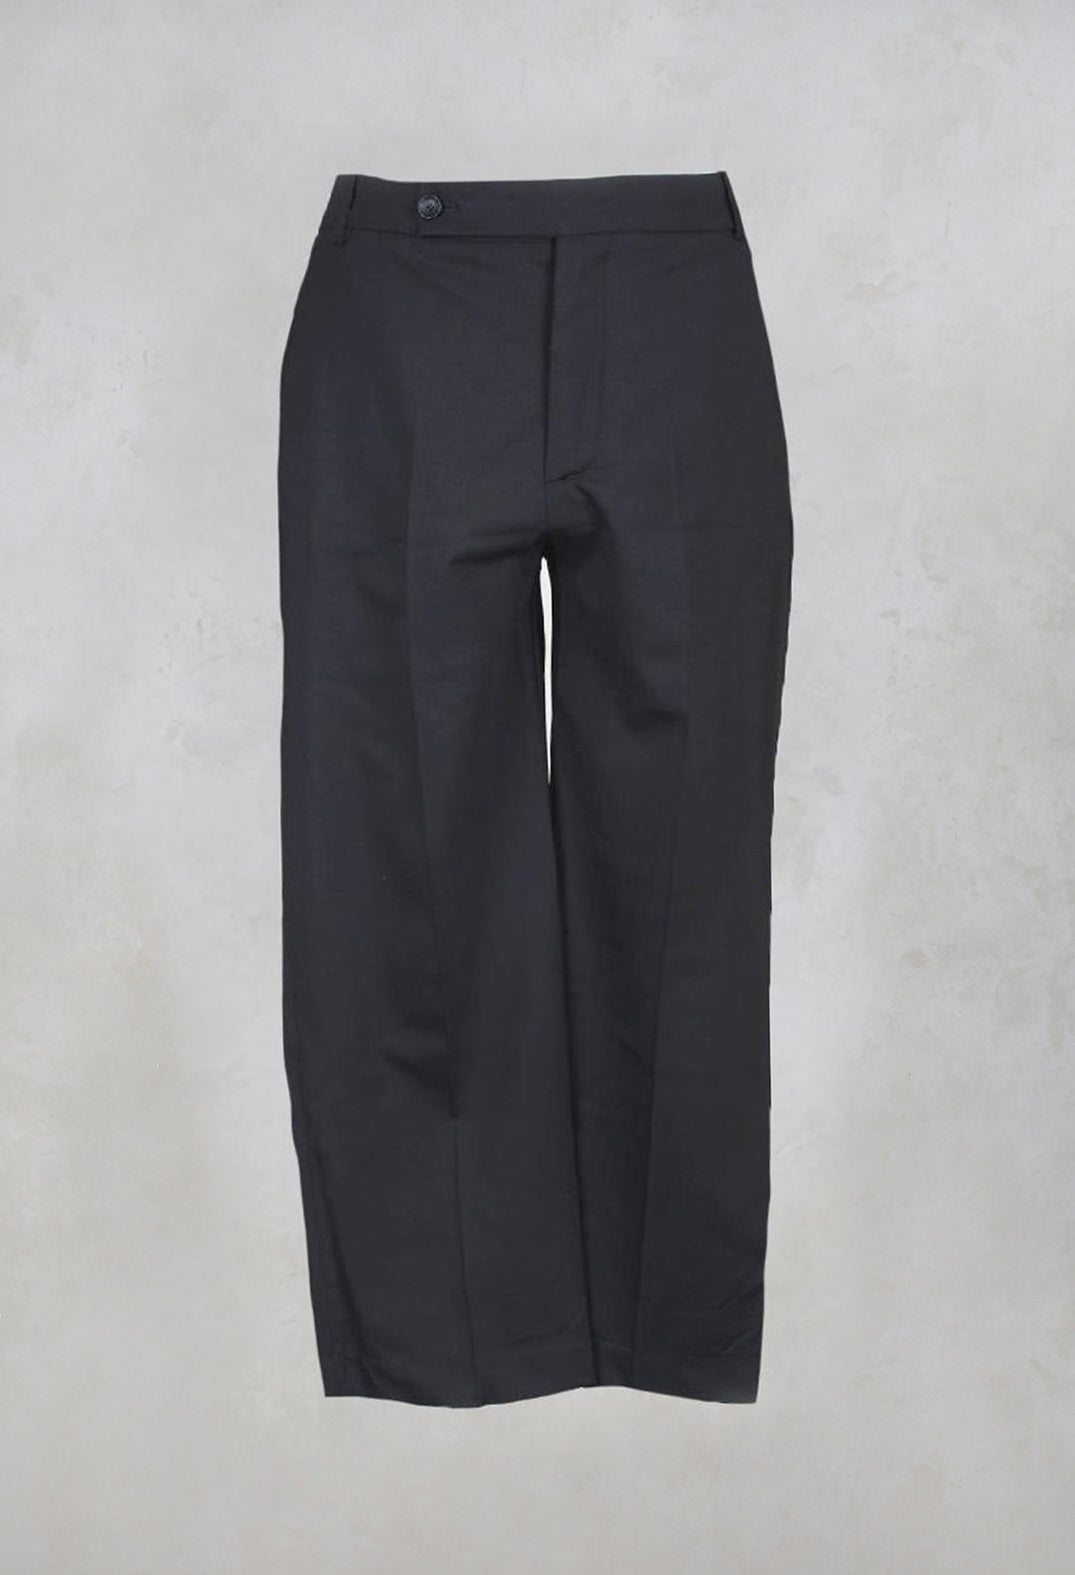 Trousers with Button at Waistband in Black